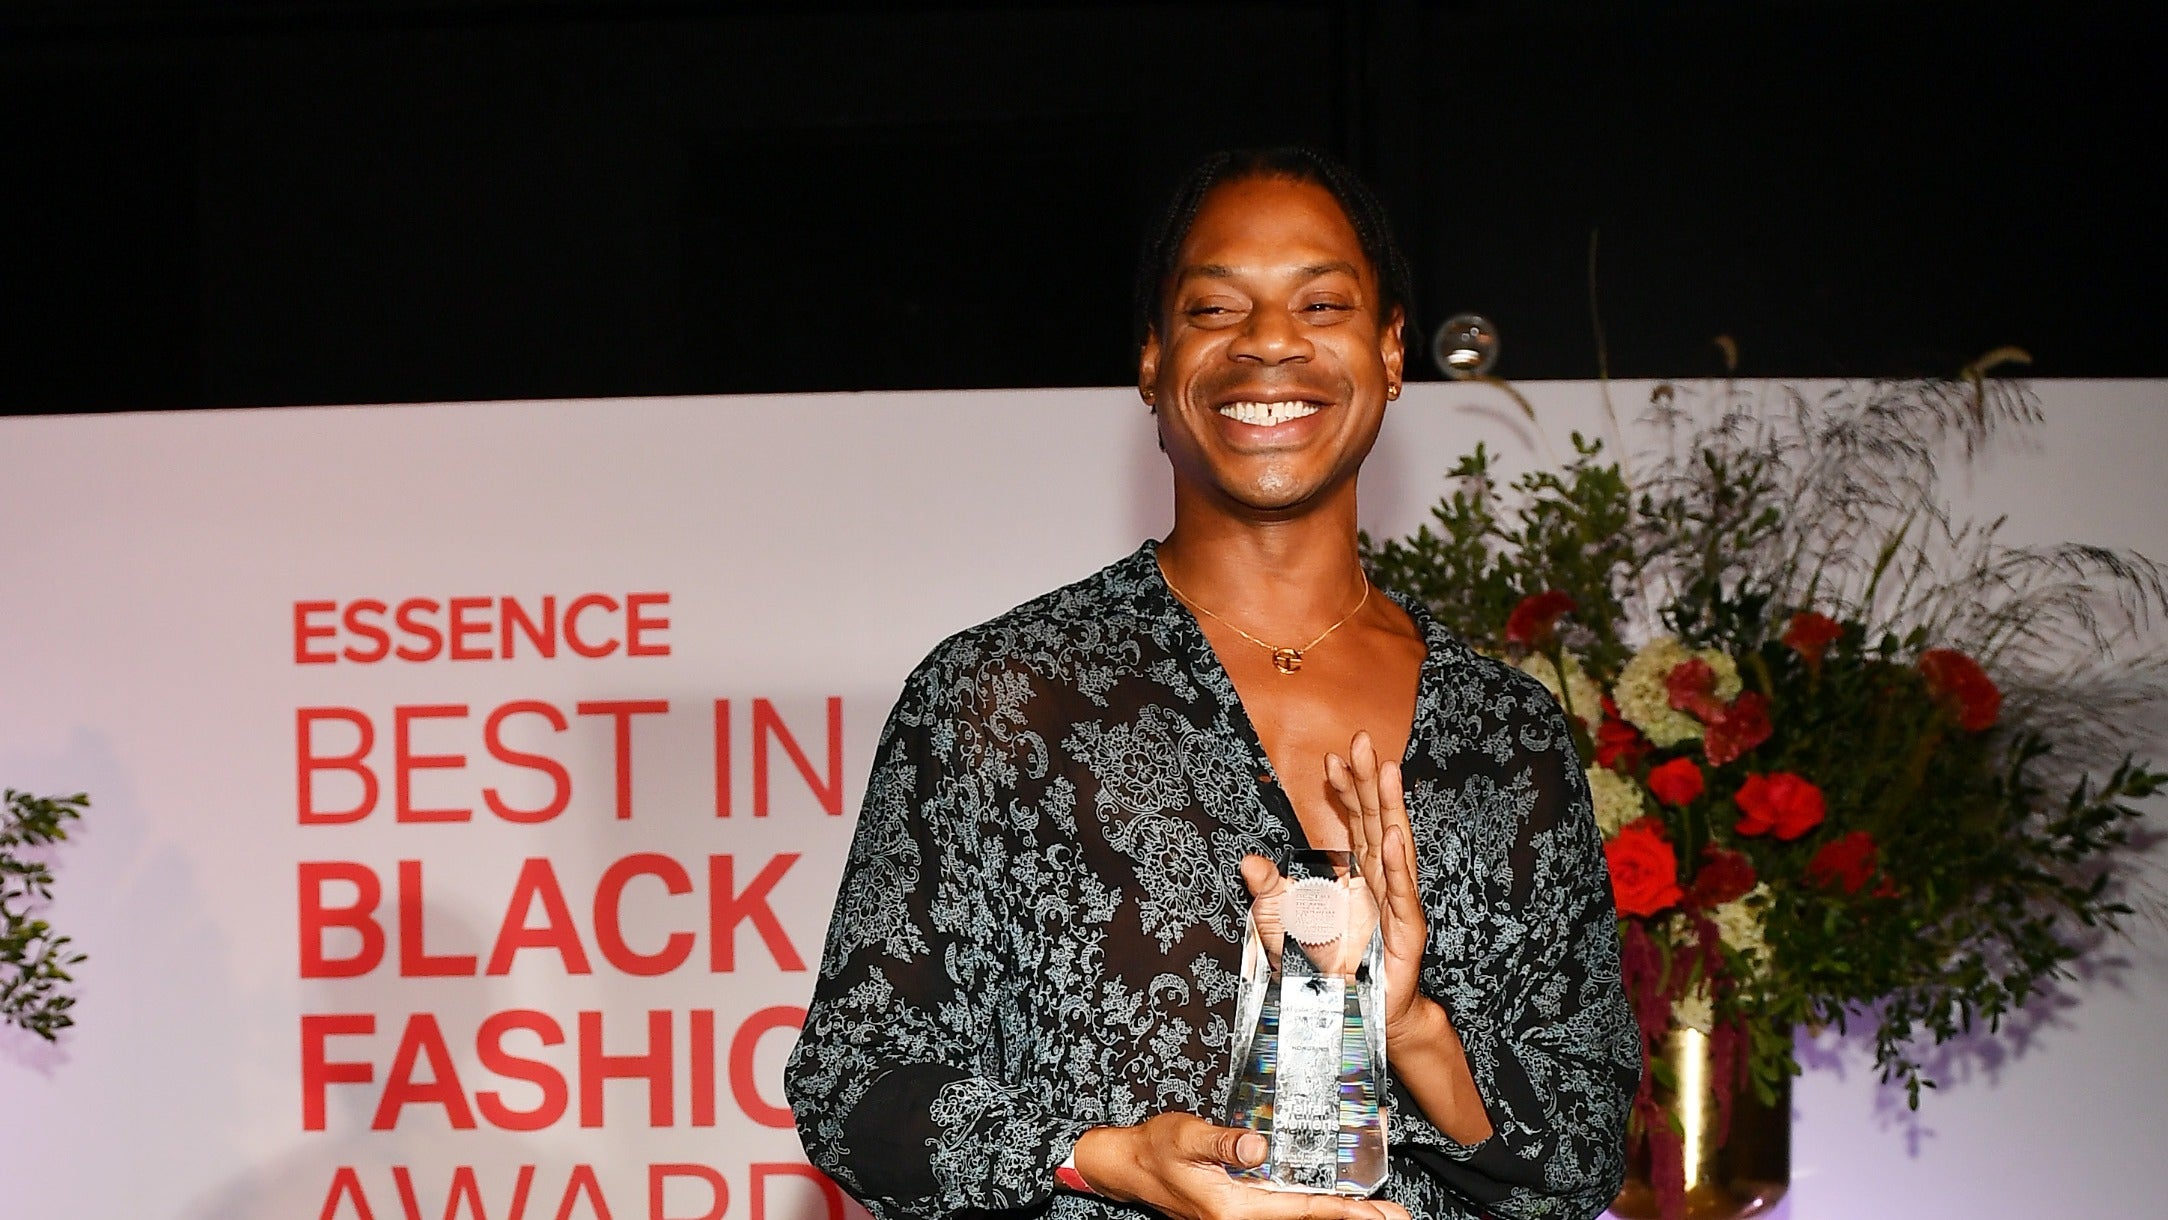 Telfar Clemens Wins Best Fashion Campaign Of The Year At ESSENCE’s Best In Black Fashion Awards Telfar Clemens Wins Best Fashion Campaign Of The Year At ESSENCE’s Best In Black Fashion Awards 